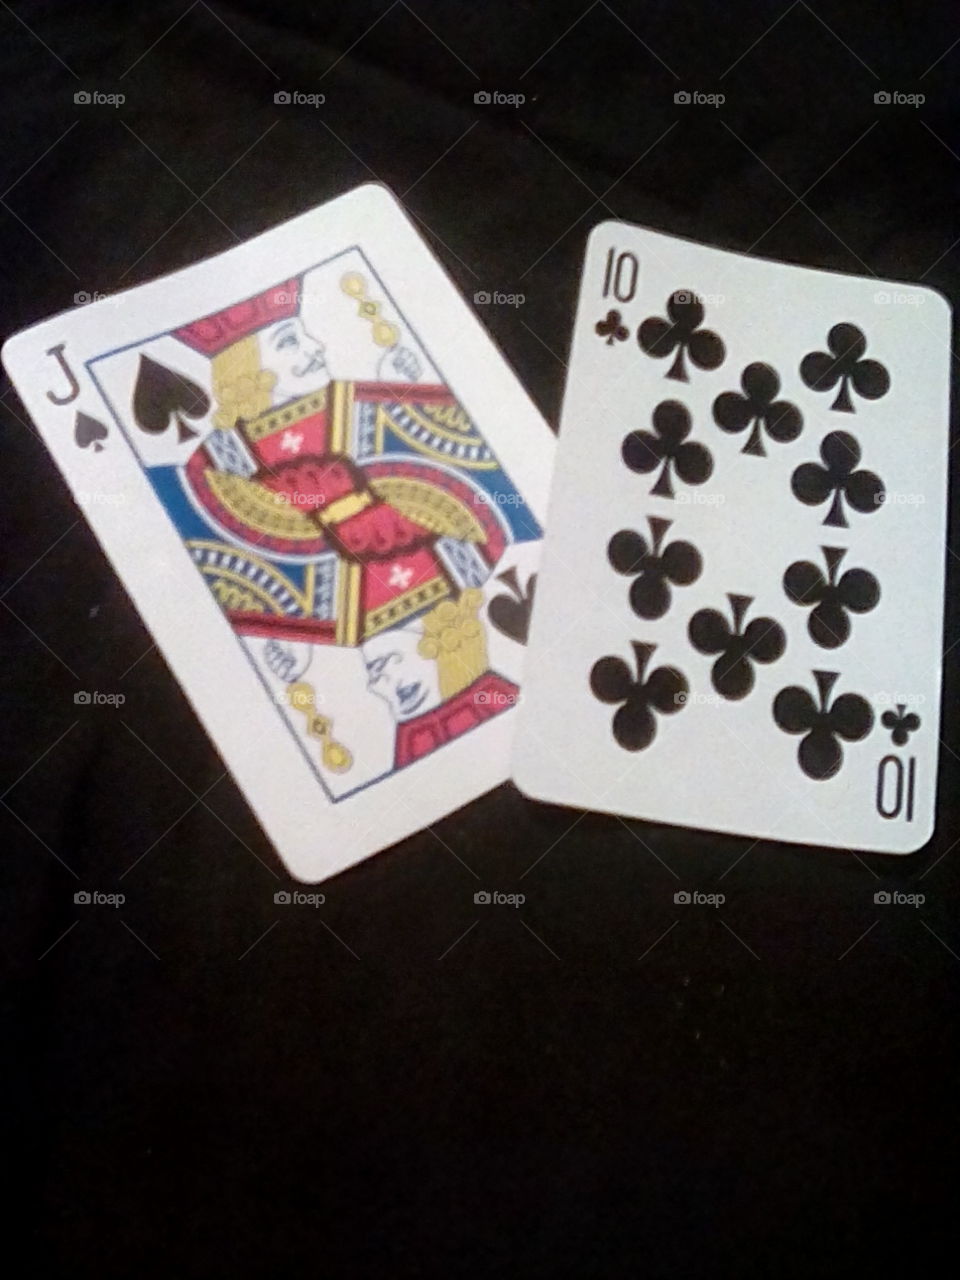 Two playing cards placed over a dark surface